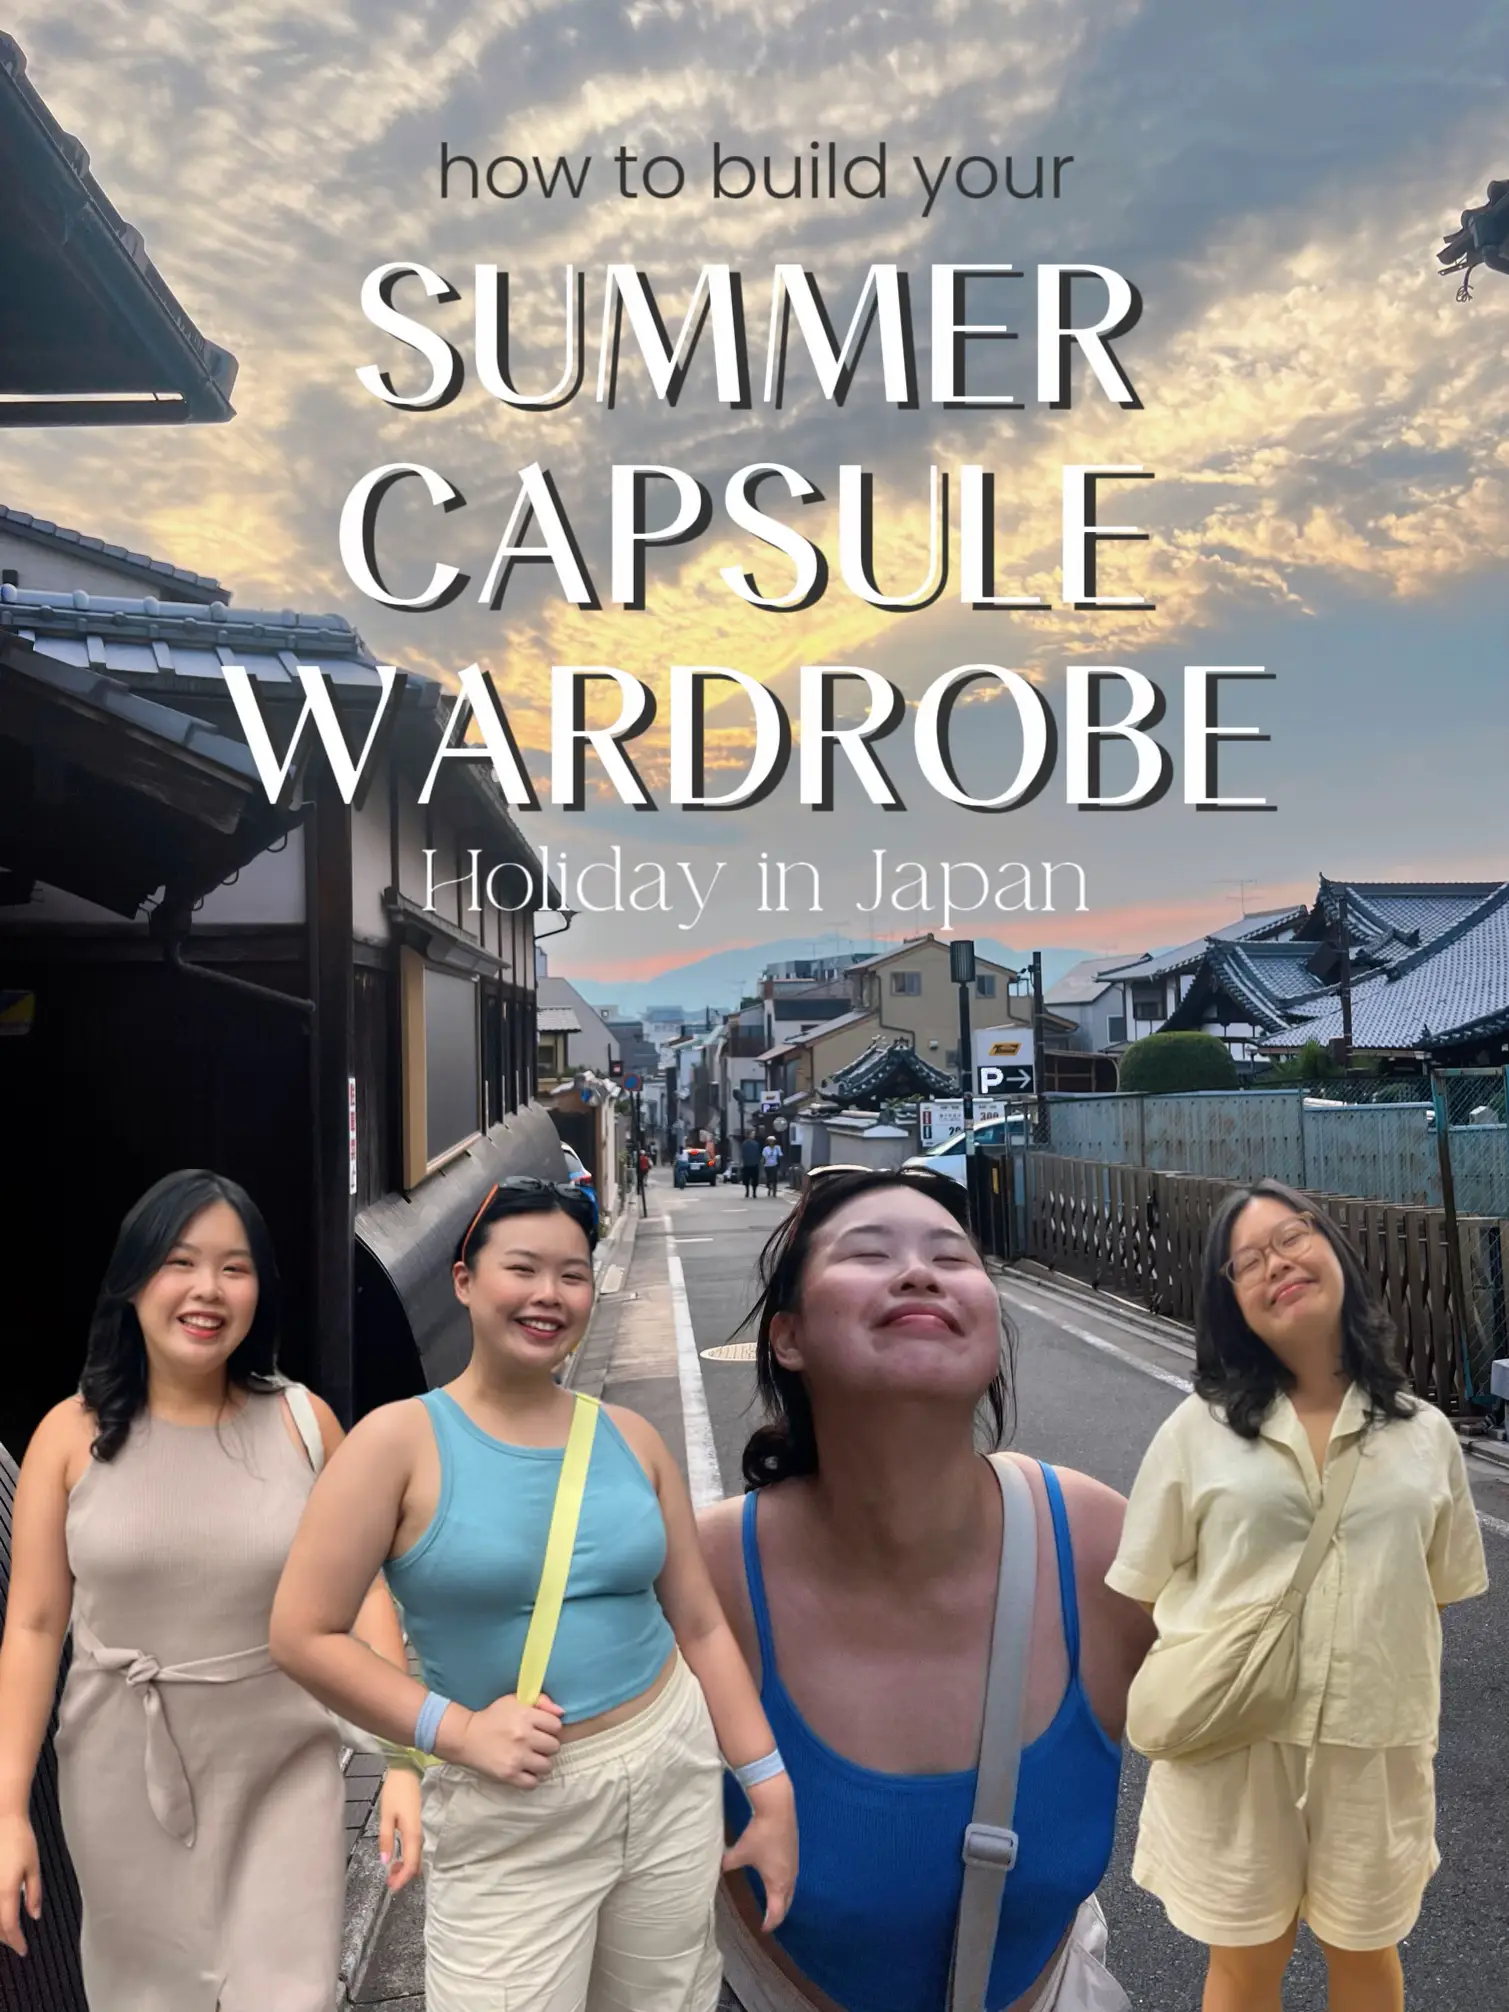 Building a Capsule Wardrobe for Summer